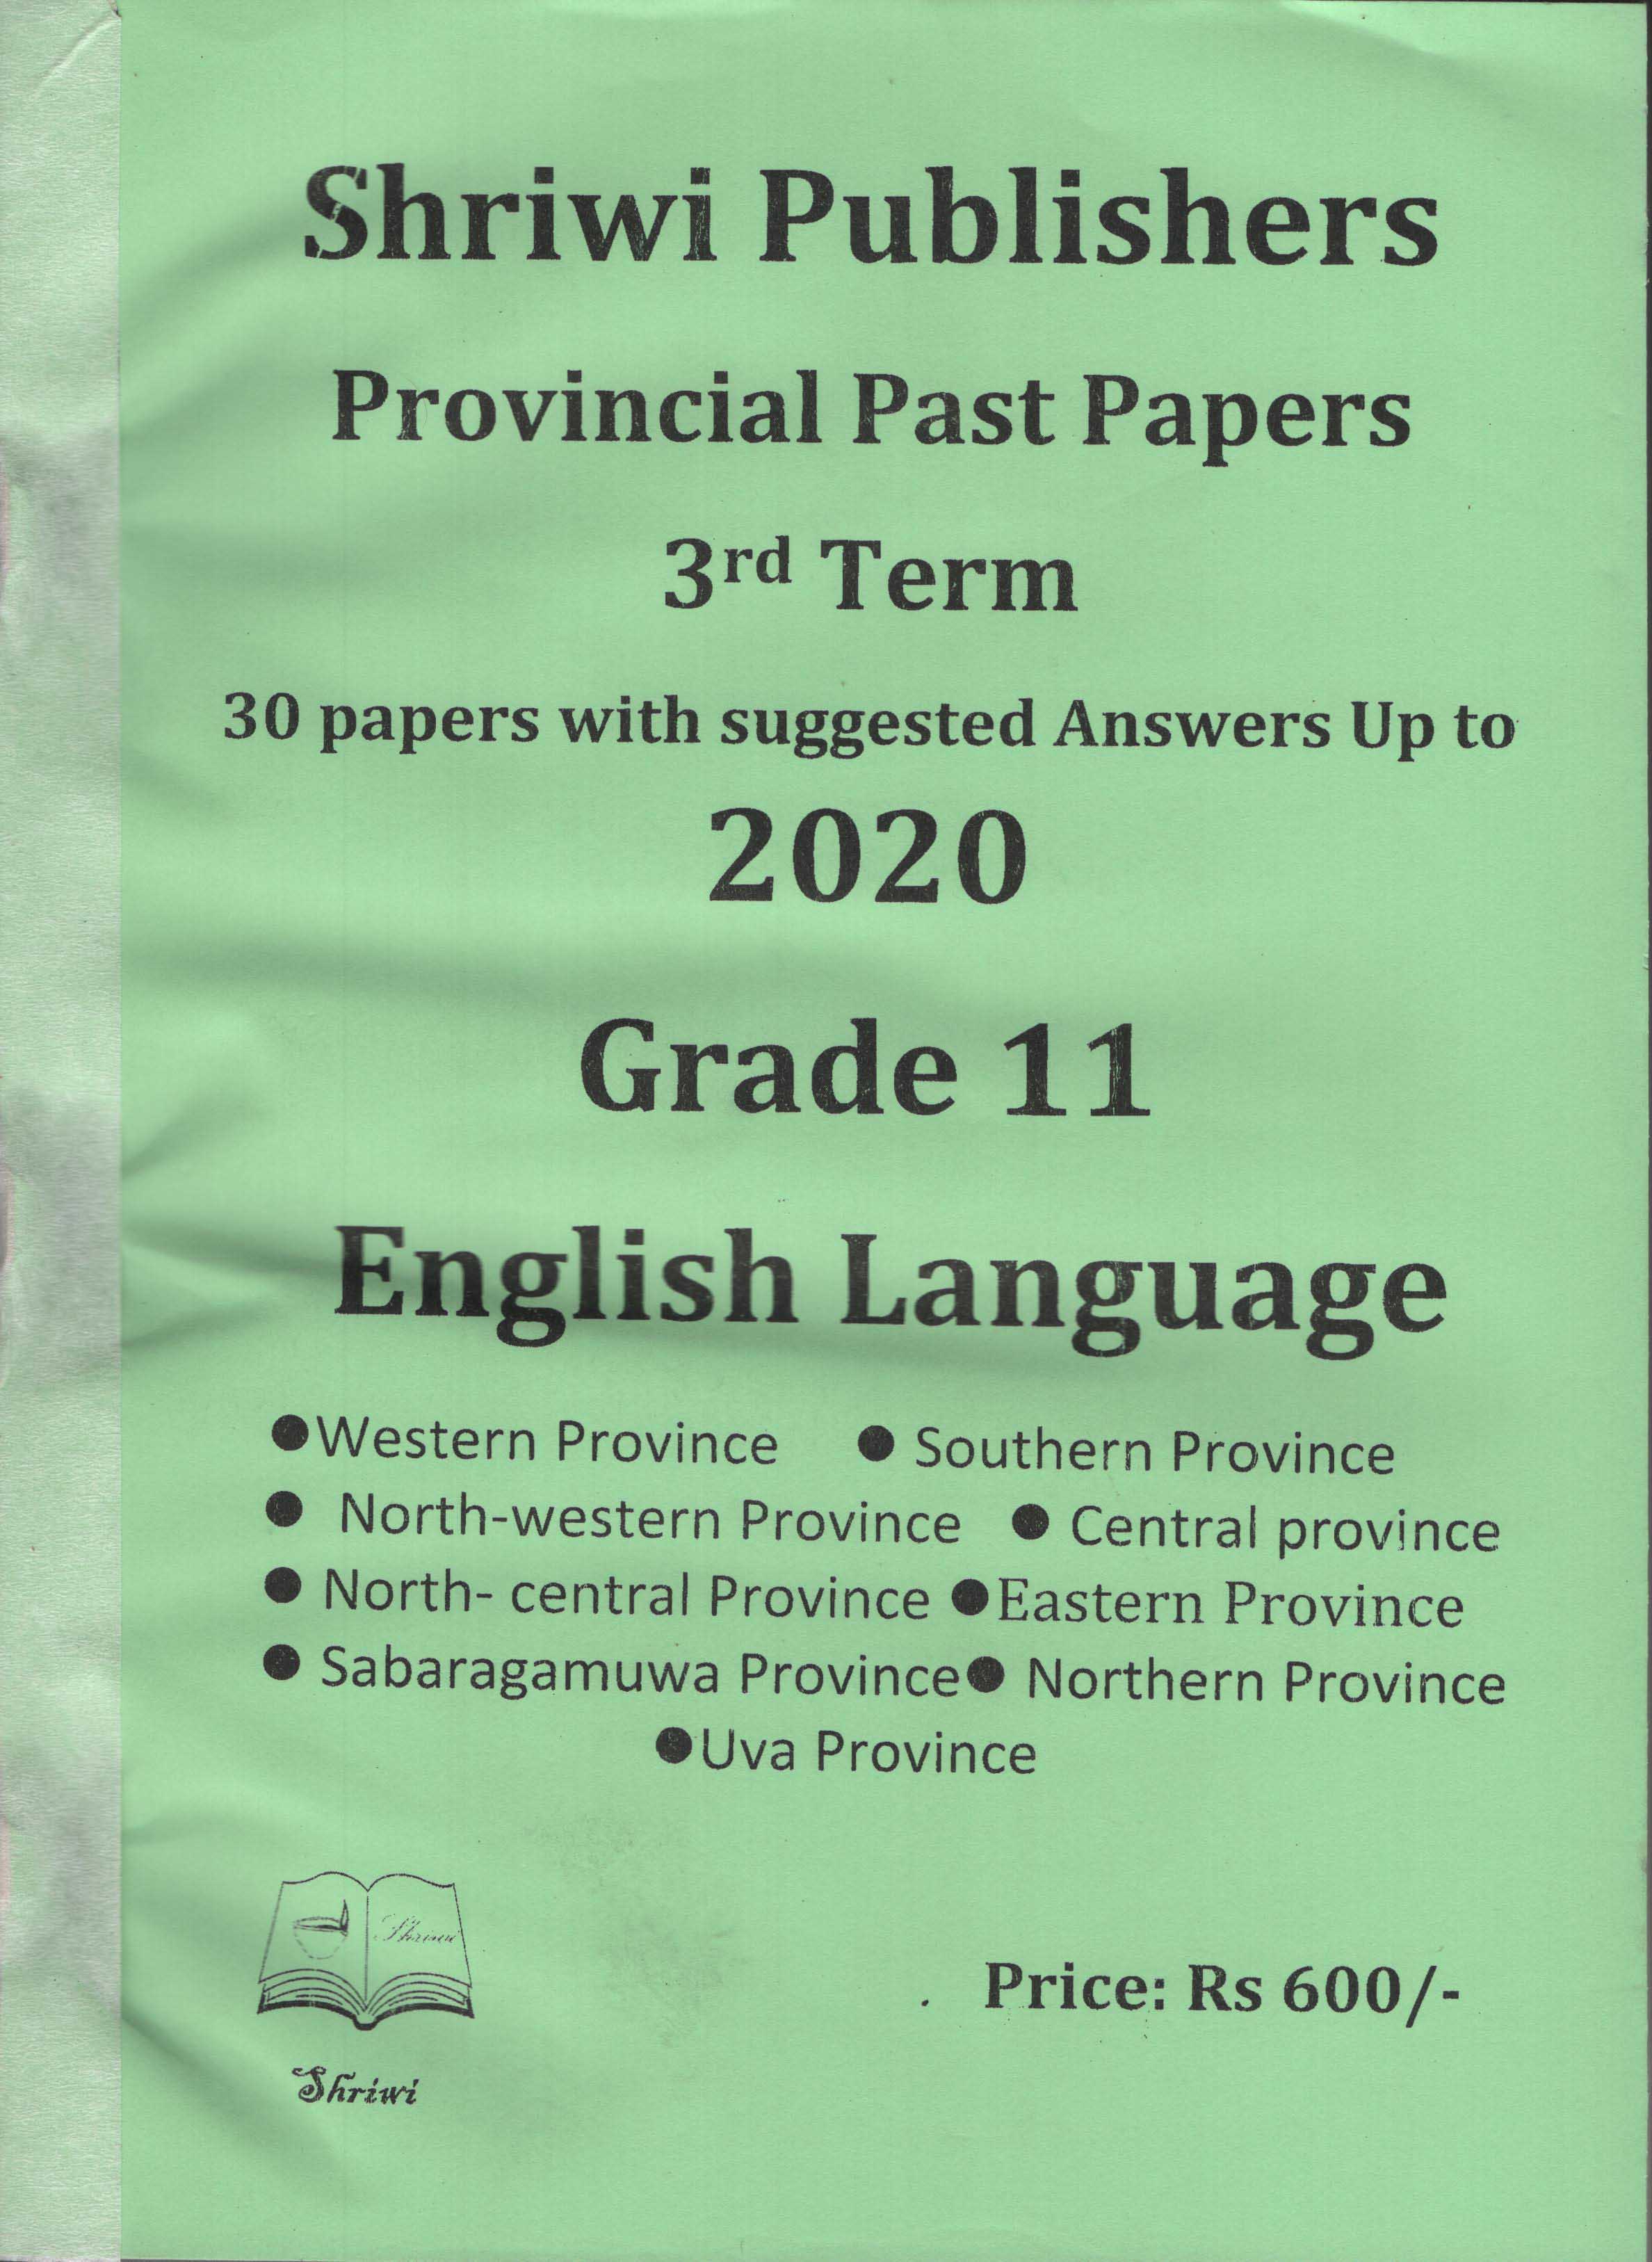 Shriwi Grade 11 English Language Provincial Past Papers 3rd Term with Suggested Answers up to 2021